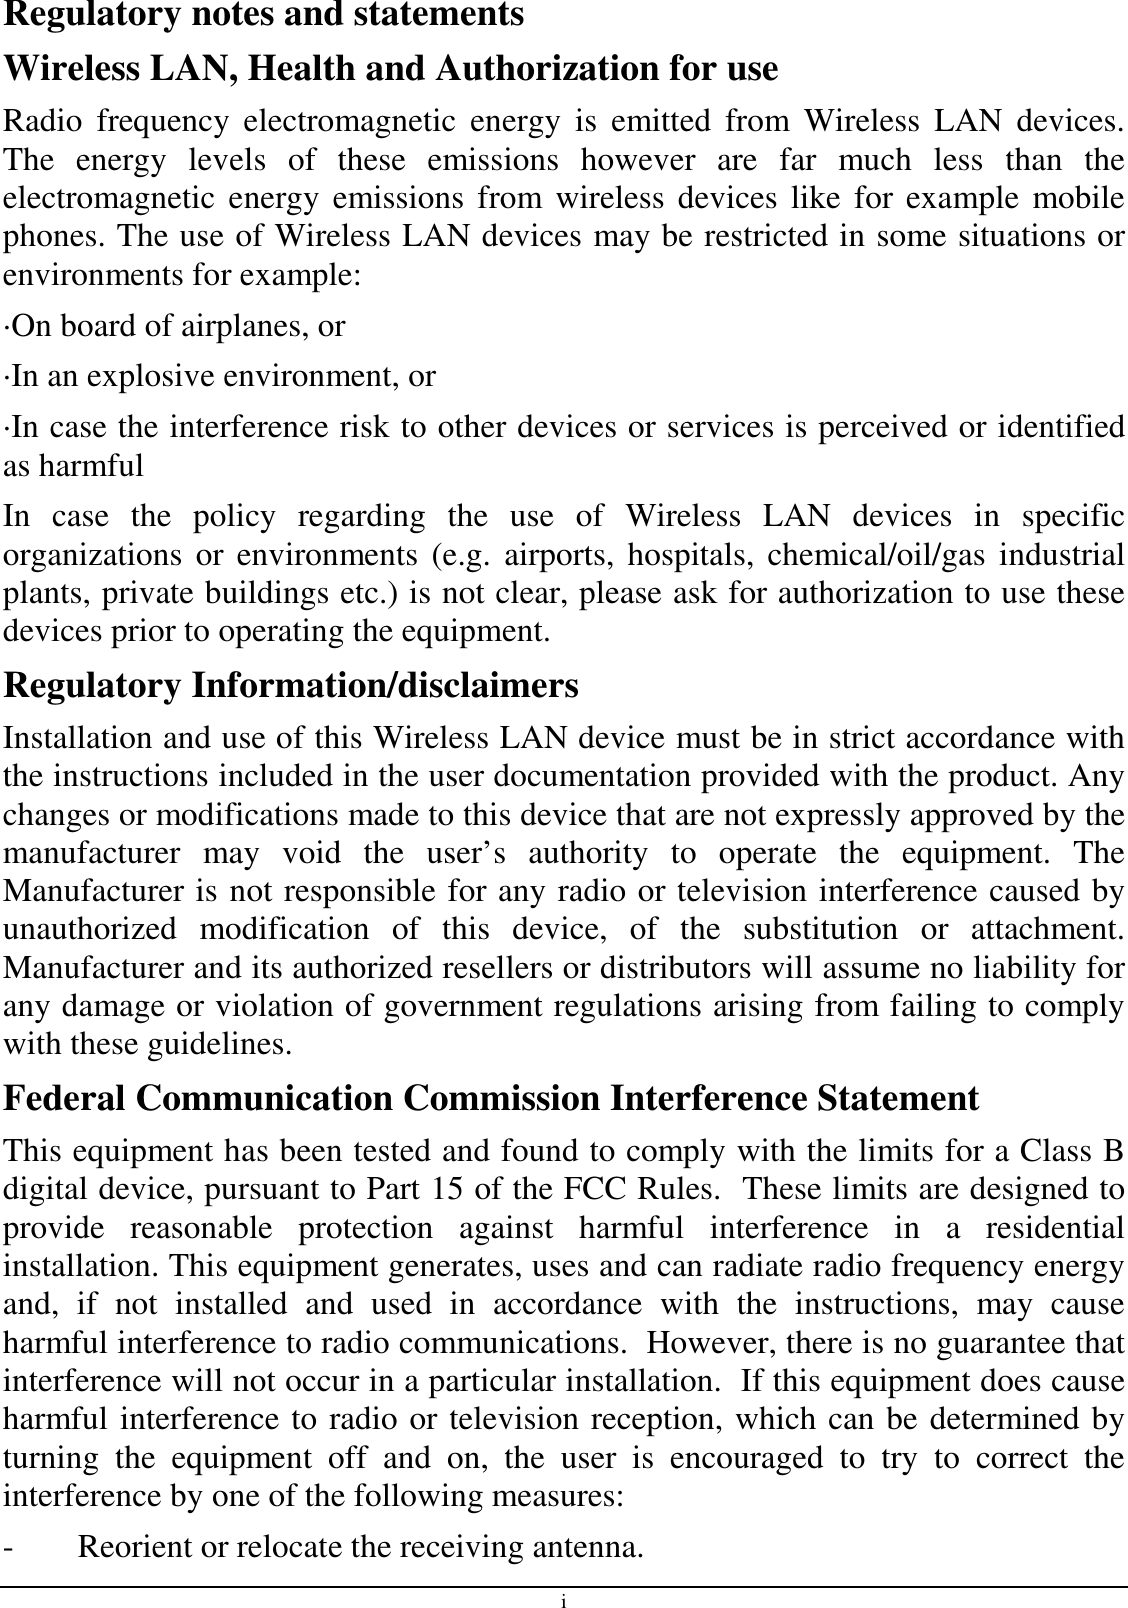 i Regulatory notes and statements Wireless LAN, Health and Authorization for use Radio  frequency  electromagnetic  energy  is  emitted  from  Wireless  LAN  devices. The  energy  levels  of  these  emissions  however  are  far  much  less  than  the electromagnetic  energy  emissions  from wireless devices like for example  mobile phones. The use of Wireless LAN devices may be restricted in some situations or environments for example: ·On board of airplanes, or ·In an explosive environment, or ·In case the interference risk to other devices or services is perceived or identified as harmful In  case  the  policy  regarding  the  use  of  Wireless  LAN  devices  in  specific organizations  or environments  (e.g.  airports,  hospitals, chemical/oil/gas  industrial plants, private buildings etc.) is not clear, please ask for authorization to use these devices prior to operating the equipment. Regulatory Information/disclaimers Installation and use of this Wireless LAN device must be in strict accordance with the instructions included in the user documentation provided with the product. Any changes or modifications made to this device that are not expressly approved by the manufacturer  may  void  the  user’s  authority  to  operate  the  equipment.  The Manufacturer is not responsible for any radio or television interference caused by unauthorized  modification  of  this  device,  of  the  substitution  or  attachment. Manufacturer and its authorized resellers or distributors will assume no liability for any damage or violation of government regulations arising from failing to comply with these guidelines. Federal Communication Commission Interference Statement This equipment has been tested and found to comply with the limits for a Class B digital device, pursuant to Part 15 of the FCC Rules.  These limits are designed to provide  reasonable  protection  against  harmful  interference  in  a  residential installation. This equipment generates, uses and can radiate radio frequency energy and,  if  not  installed  and  used  in  accordance  with  the  instructions,  may  cause harmful interference to radio communications.  However, there is no guarantee that interference will not occur in a particular installation.  If this equipment does cause harmful interference to radio or television reception, which can be determined by turning  the  equipment  off  and  on,  the  user  is  encouraged  to  try  to  correct  the interference by one of the following measures: -  Reorient or relocate the receiving antenna. 